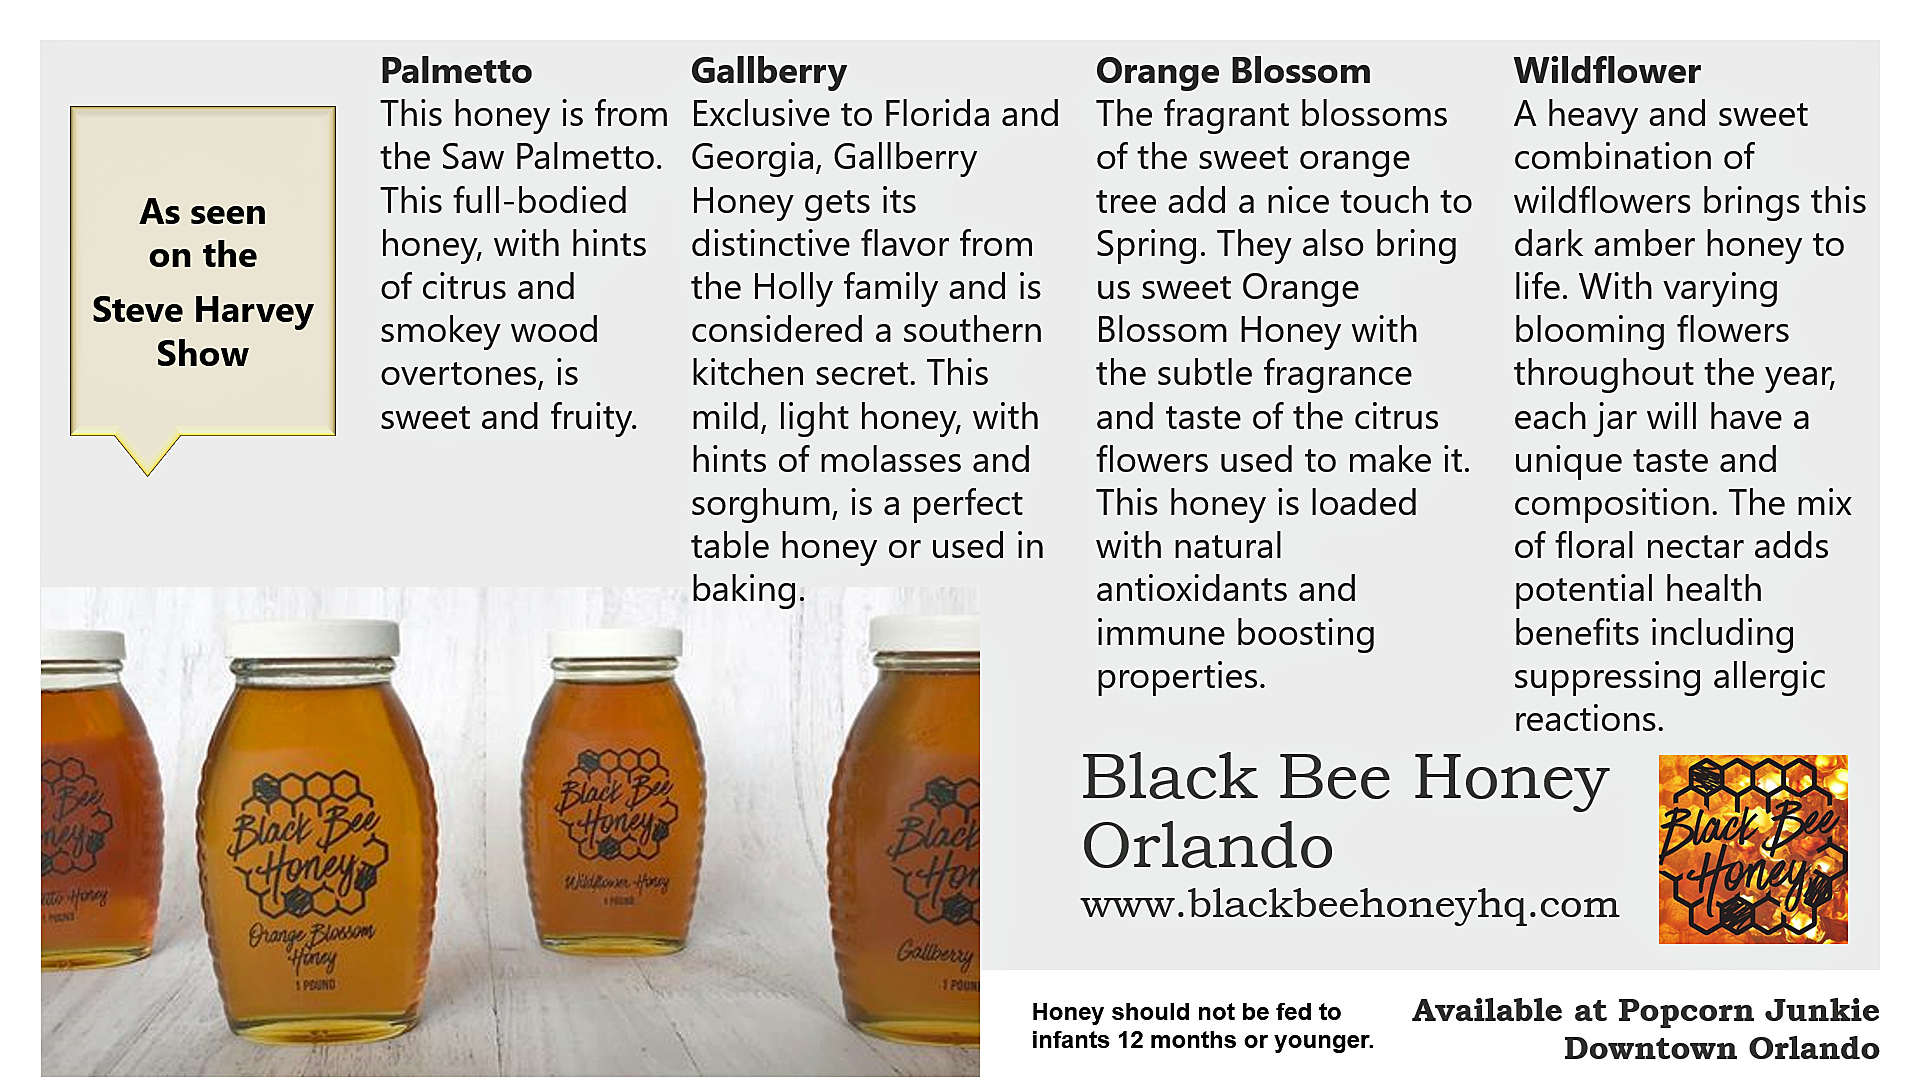 Black Bee Honey flavors Available at Popcorn Junkie